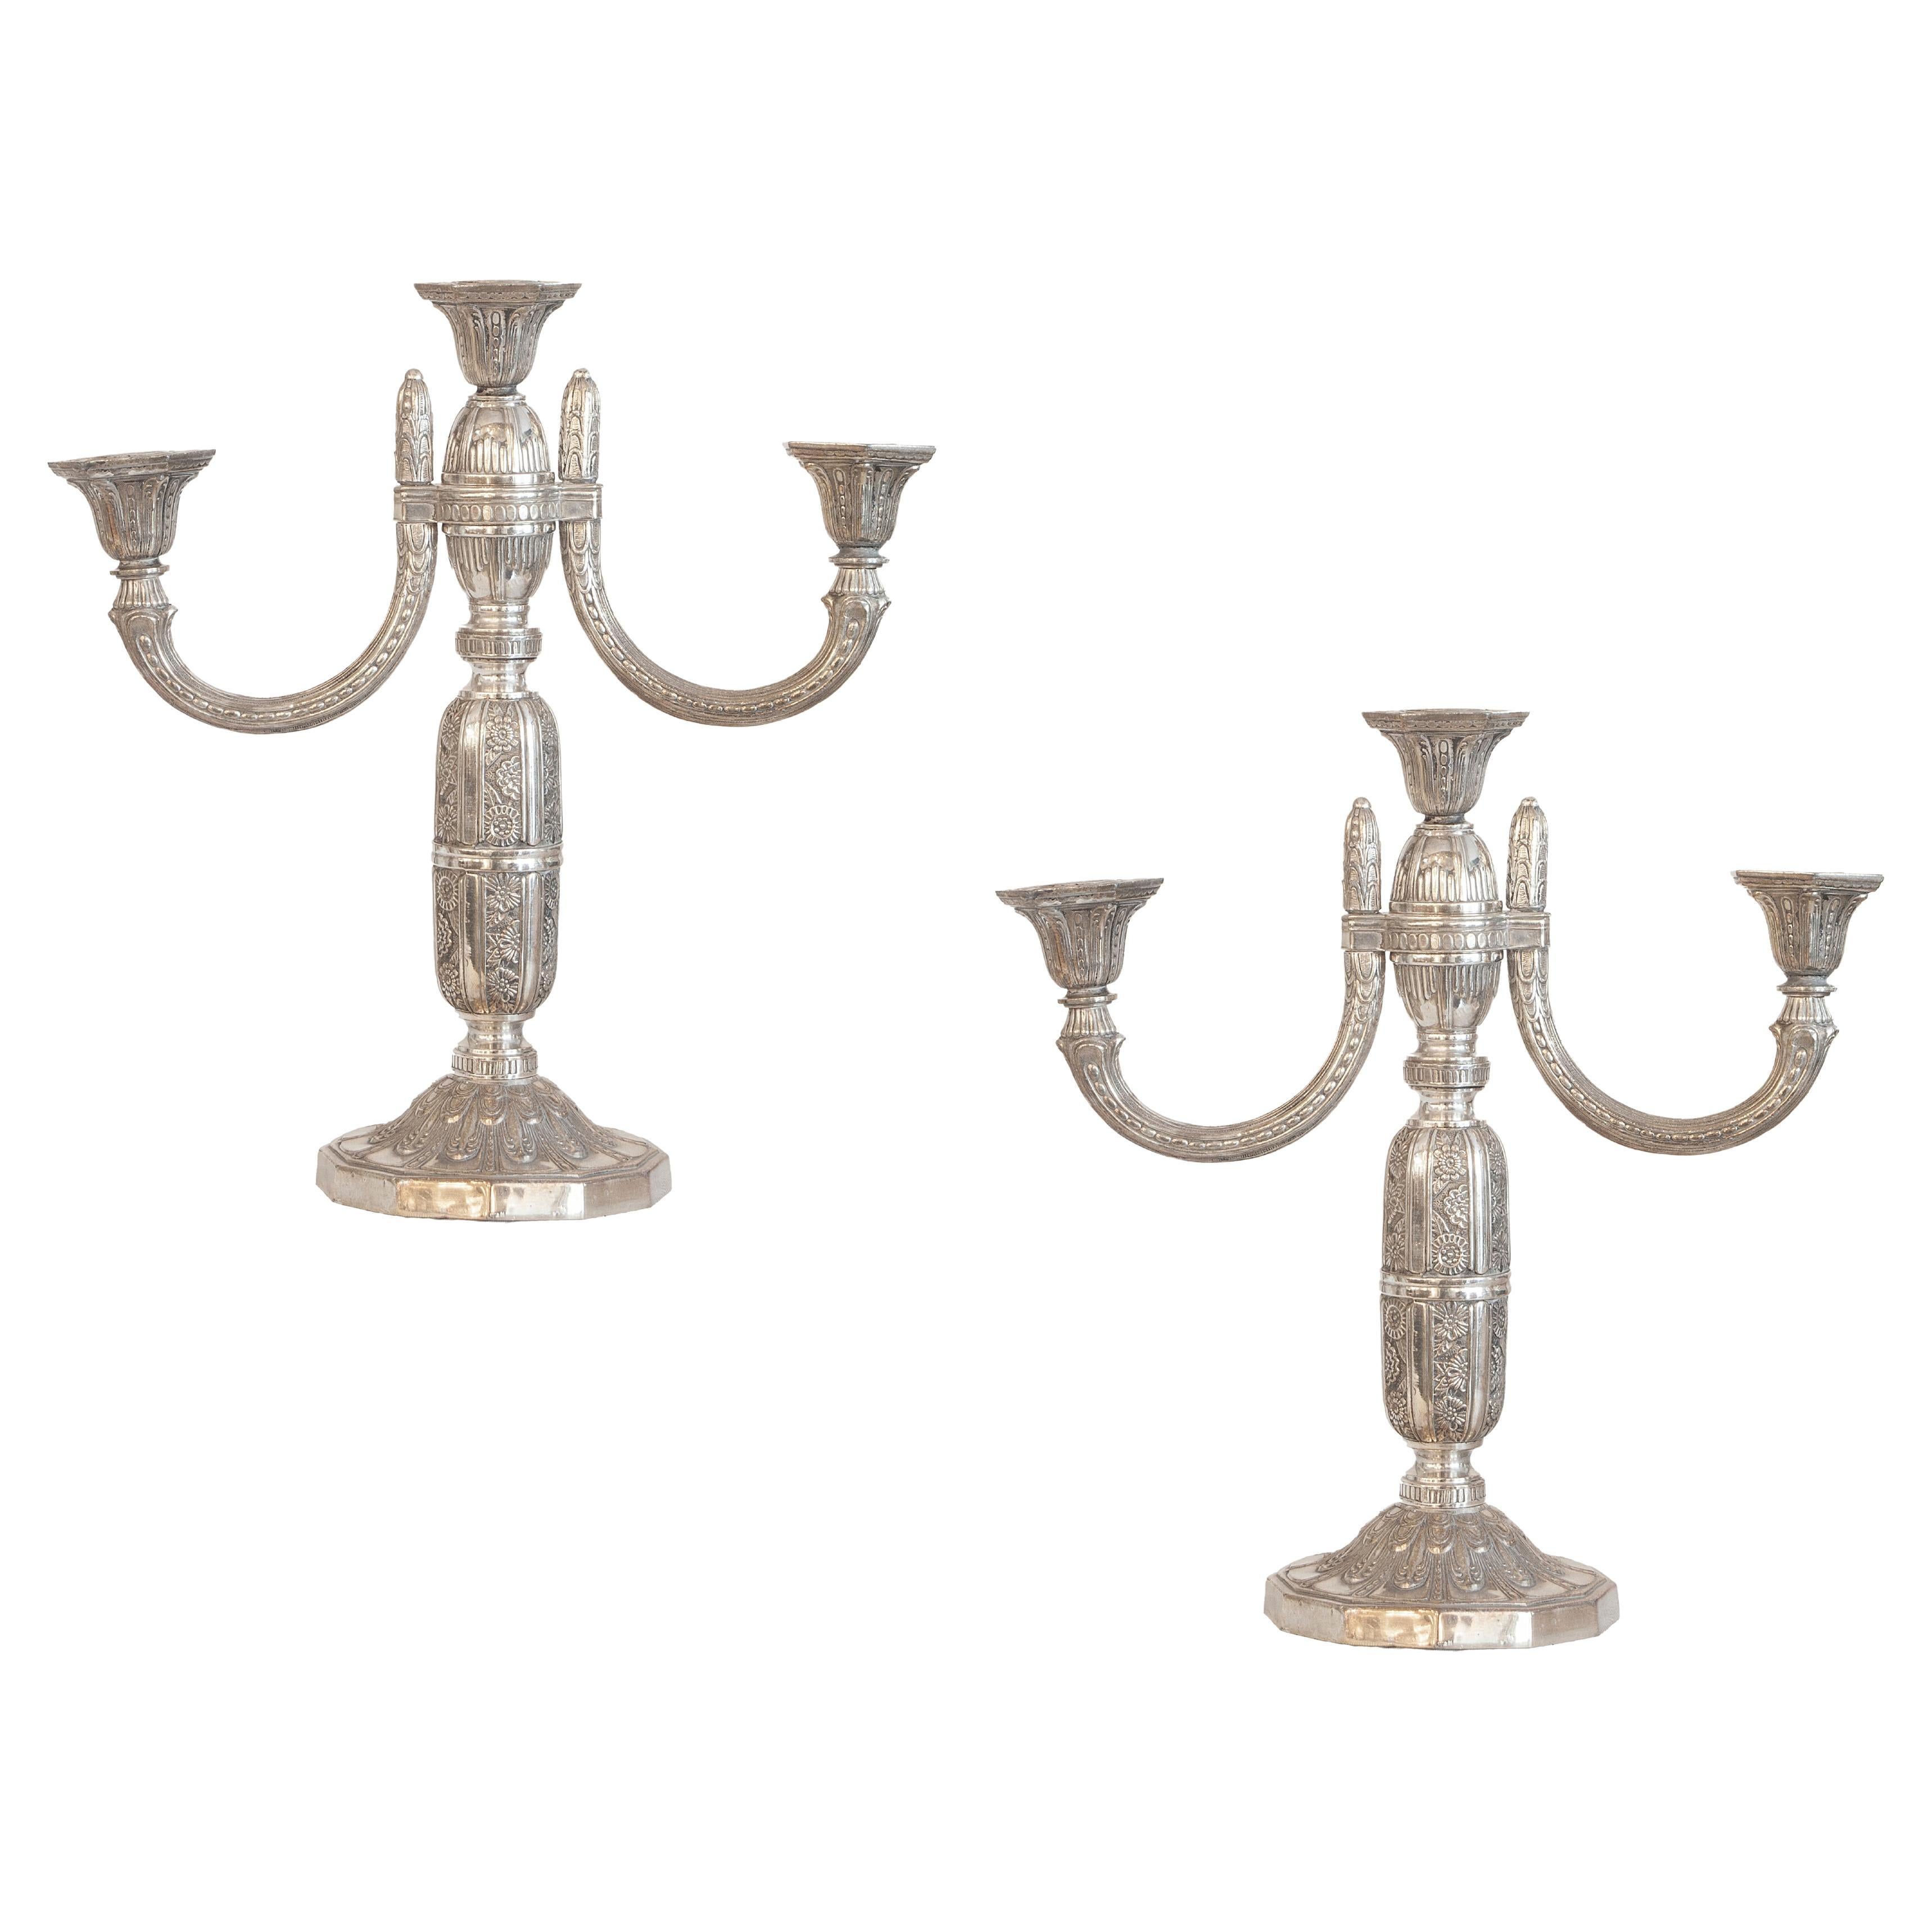 Pair of Candelabras, Art Deco in Silverplated, 1930